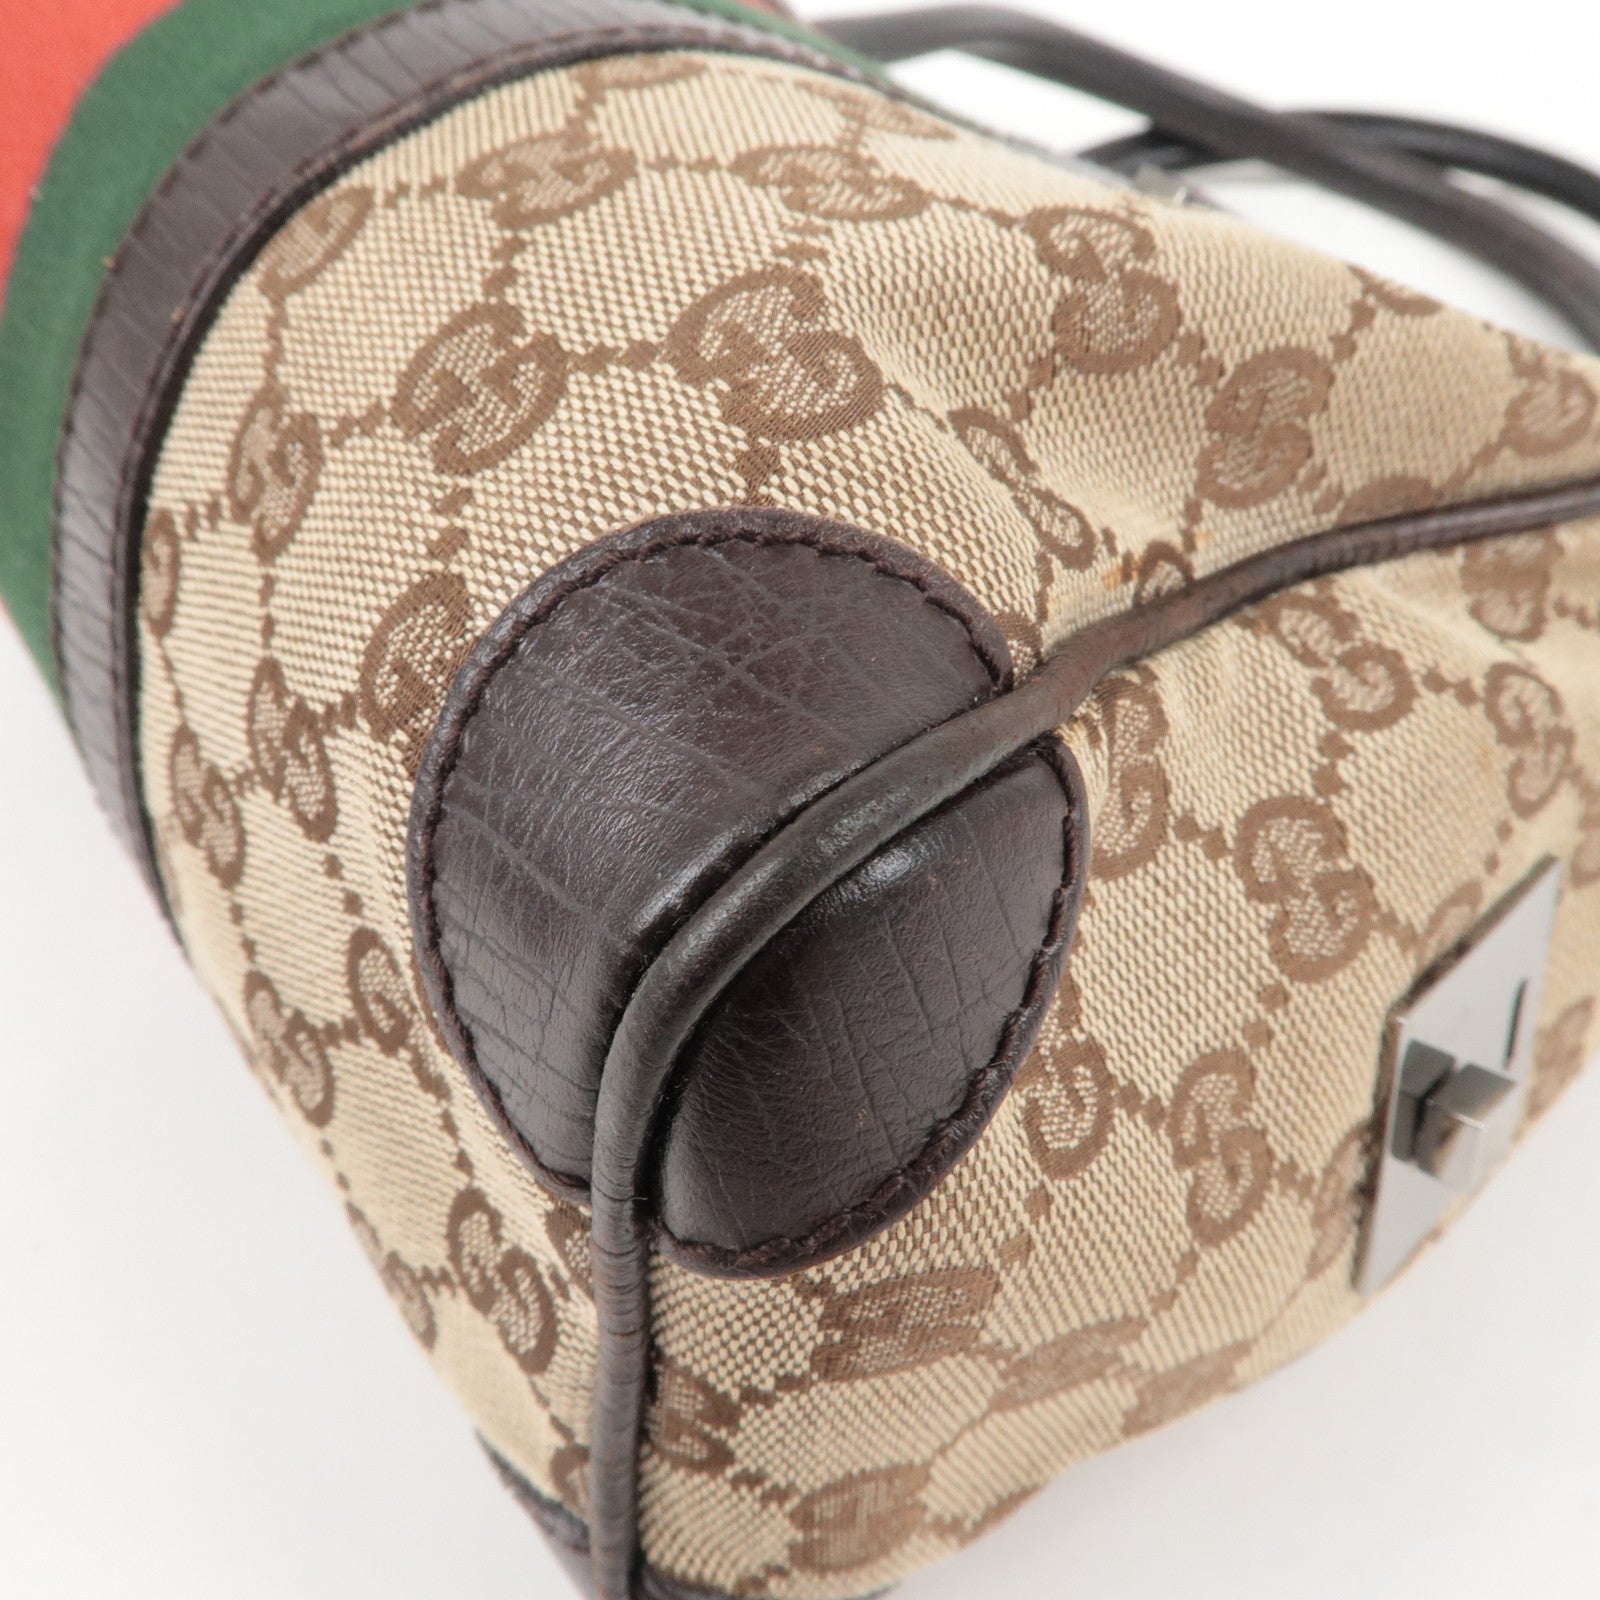 GUCCI-Sherry-GG-Canvas-Leather-Boston-Bag-Beige-Brown-30458 –  dct-ep_vintage luxury Store